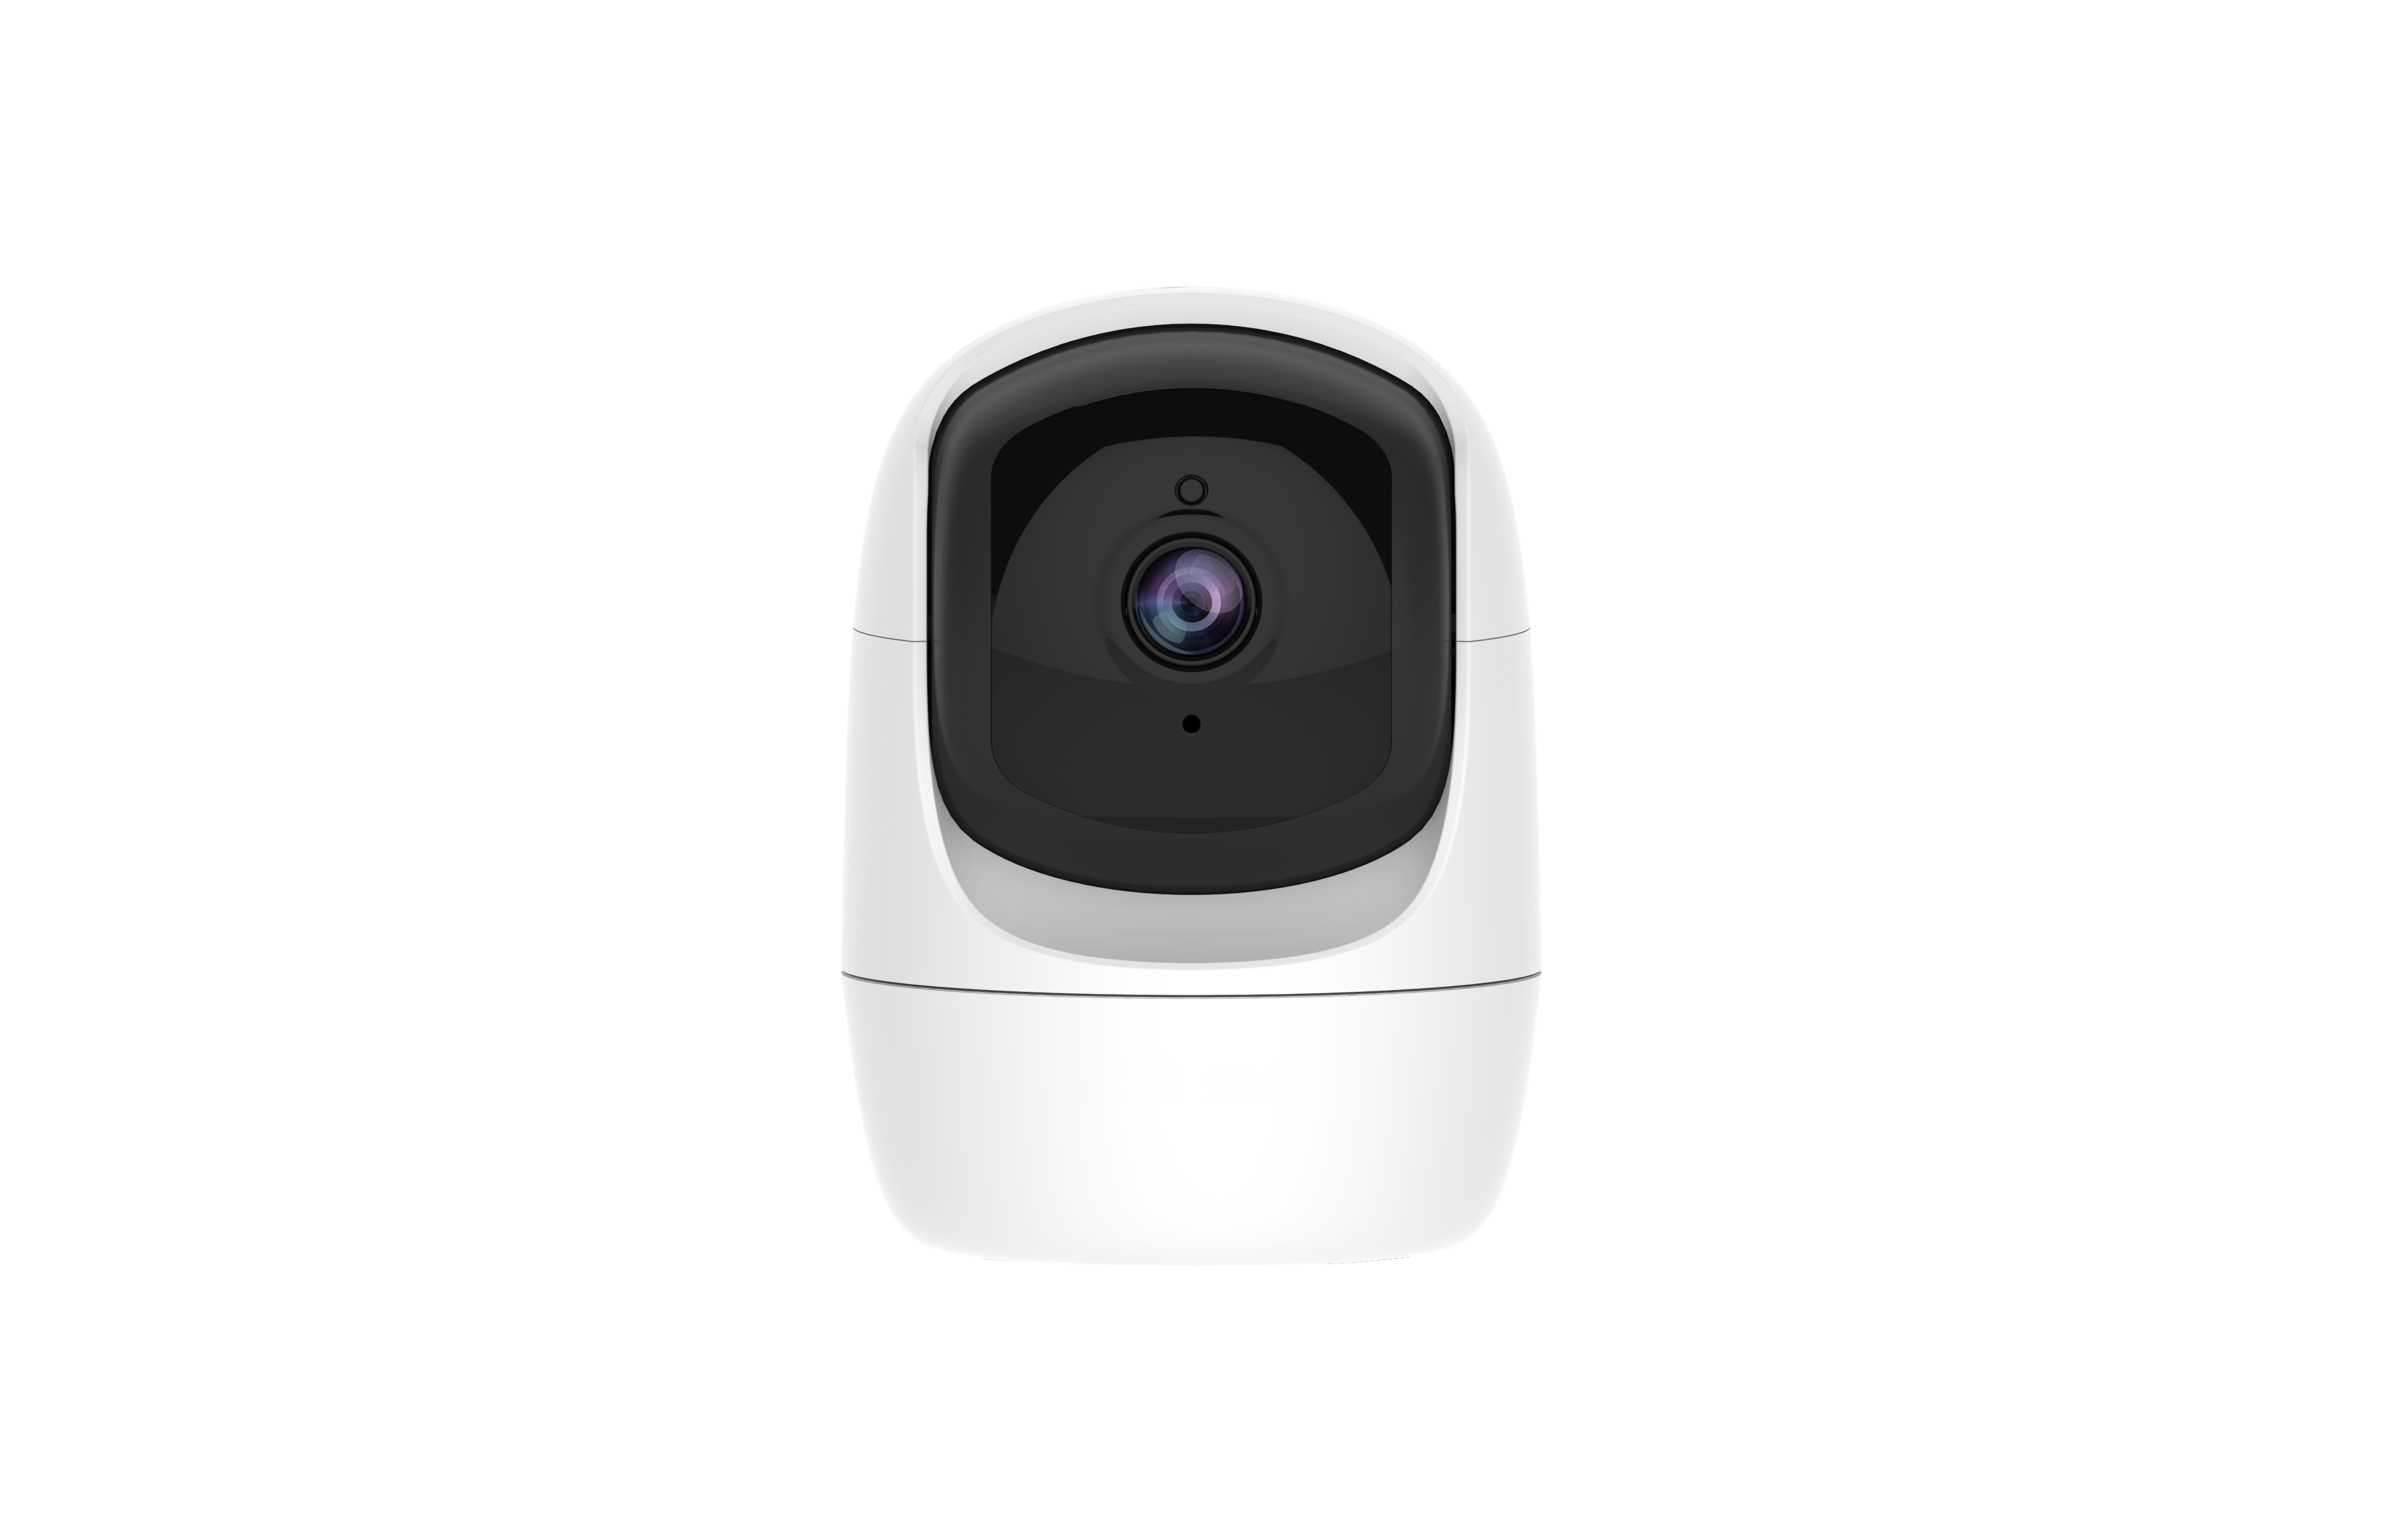 What webcam parameters do you need to pay attention to?